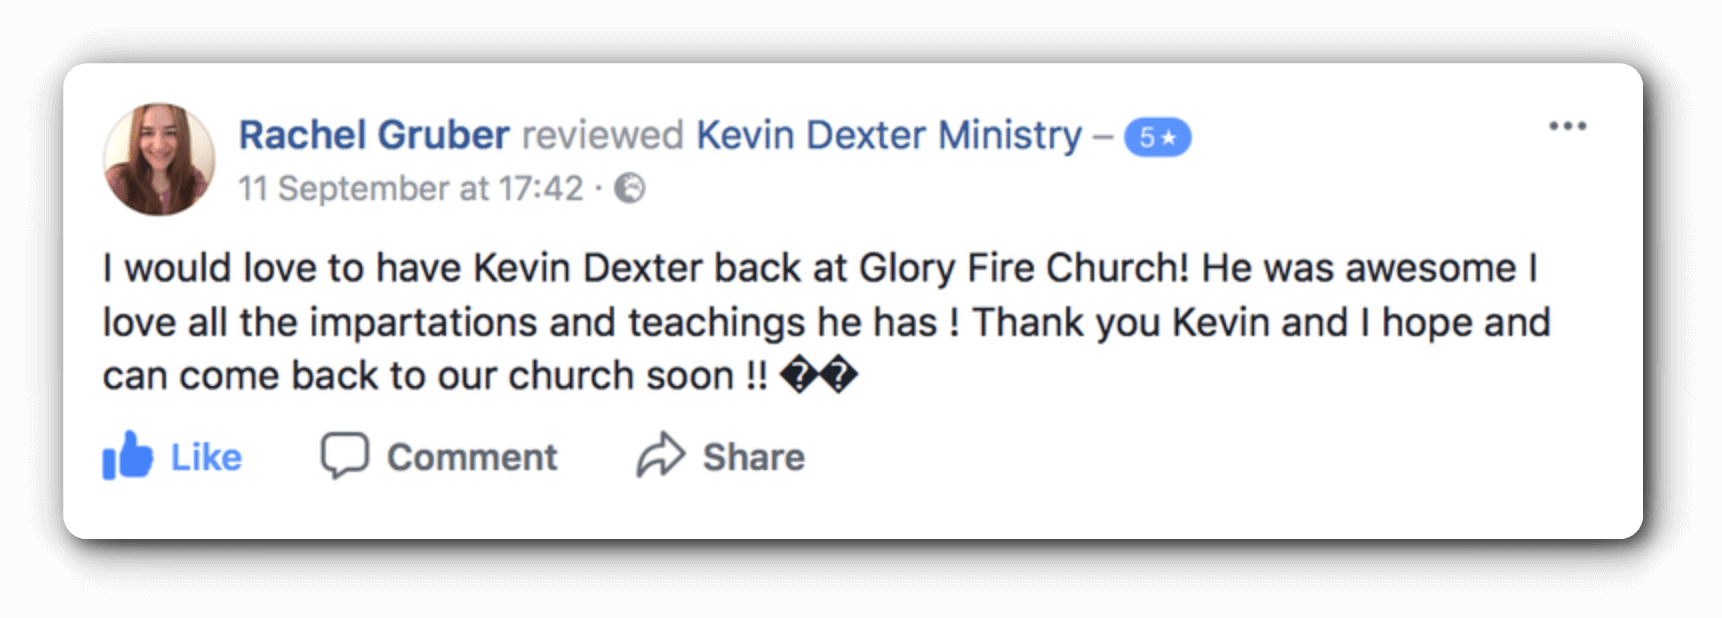 Review from Glory fire church, Sanford FL 28-29.7.2017